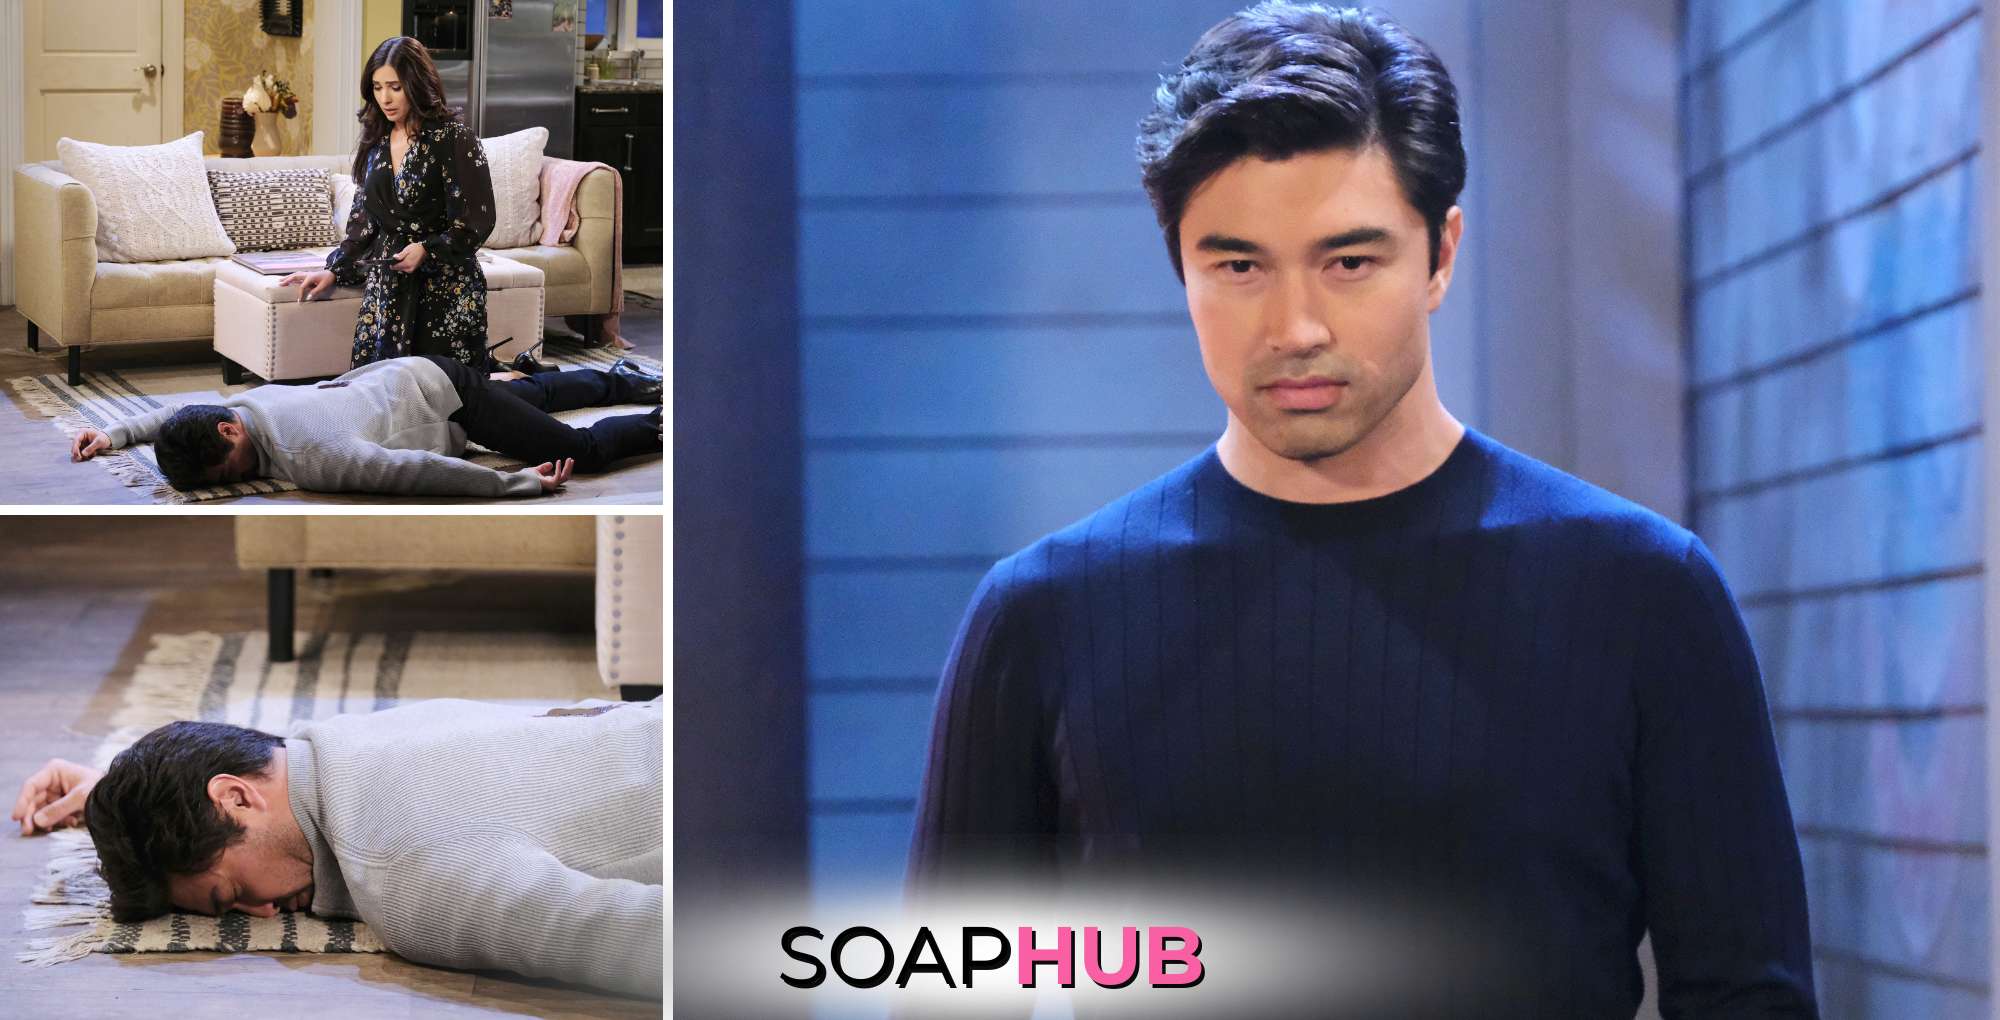 Li Shen, Gabi on Days of our Lives with the Soap Hub logo.